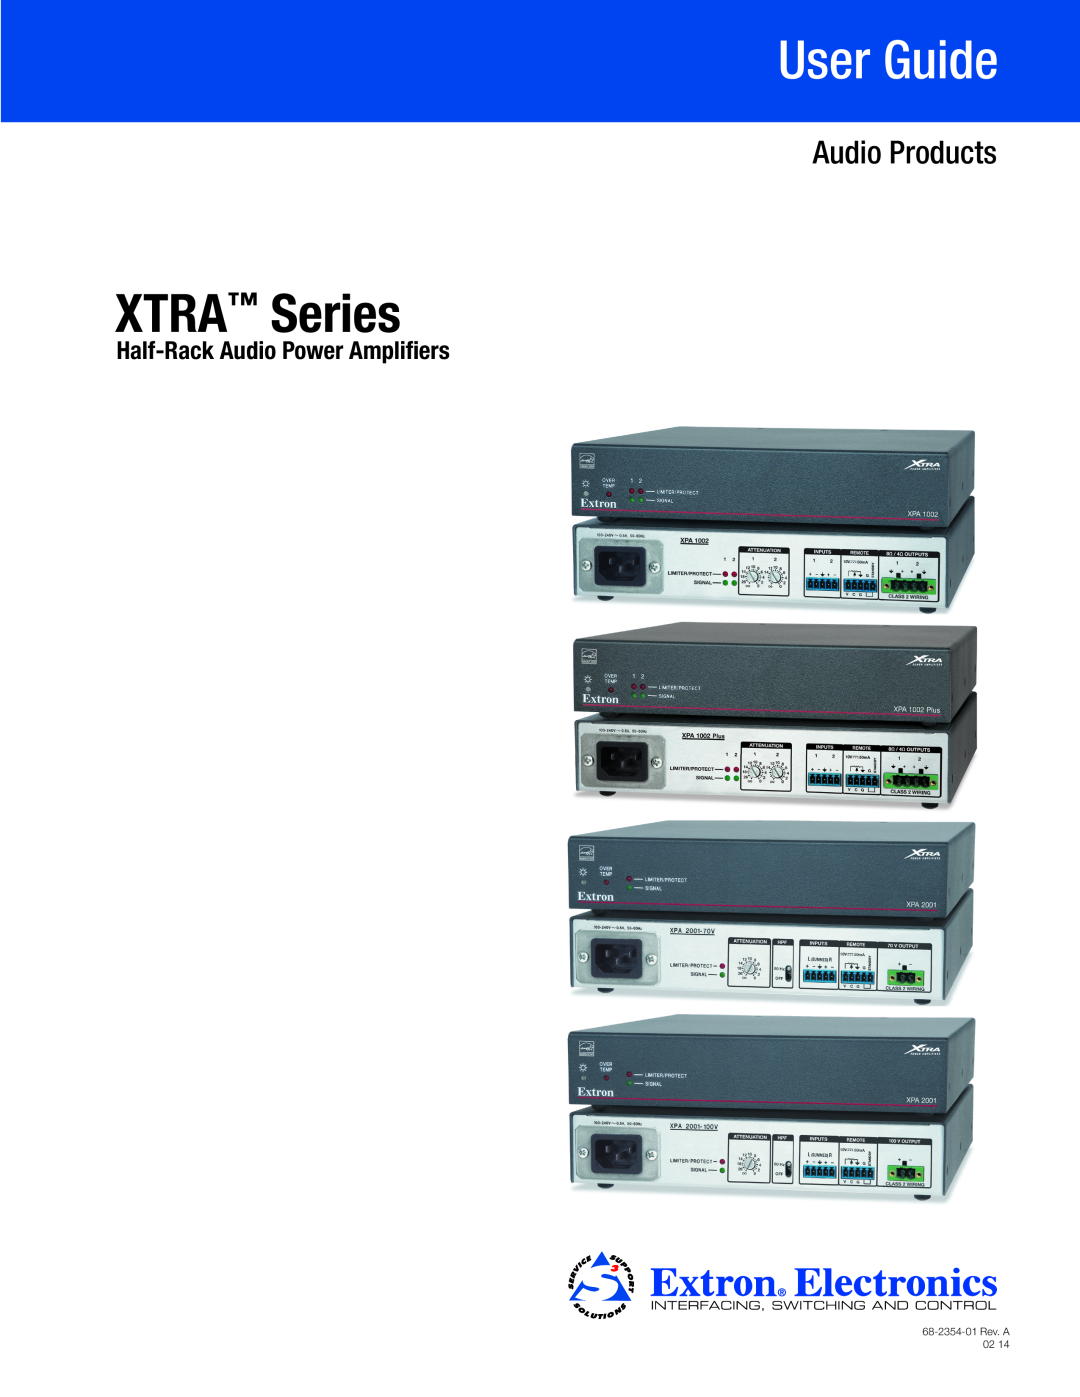 Extron electronic XTRA SERIES manual User Guide, XTRA Series, Audio Products, Half-RackAudio Power Amplifiers 